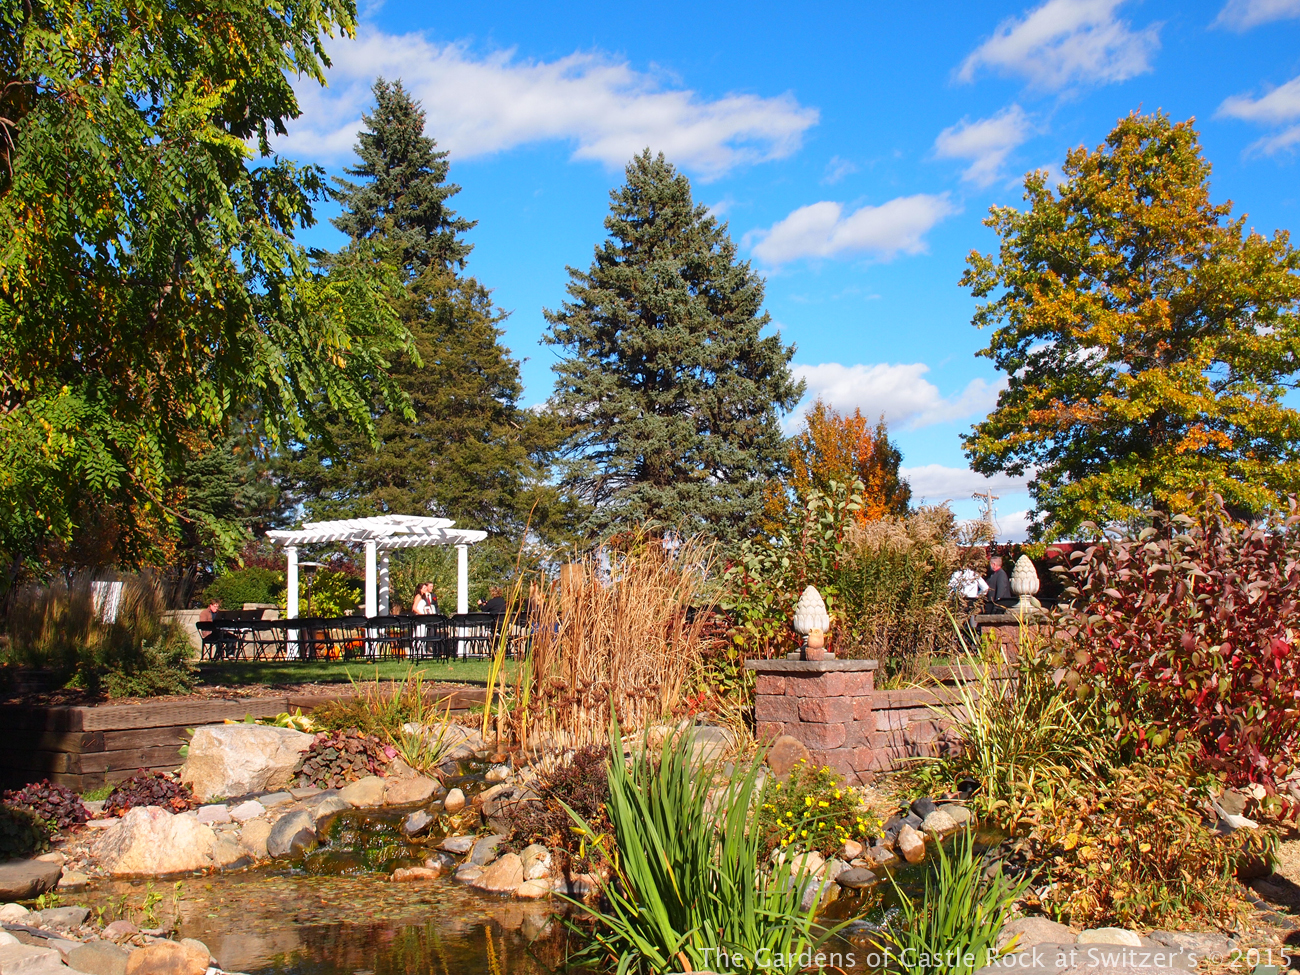 Beautiful Minnesota Wedding on a Perfect October Day #TheGardenofCR #MNWedding #Wedding ~ Heather and Chris at The Gardens of Castle Rock ~ The Minnesota Wedding and Event Center